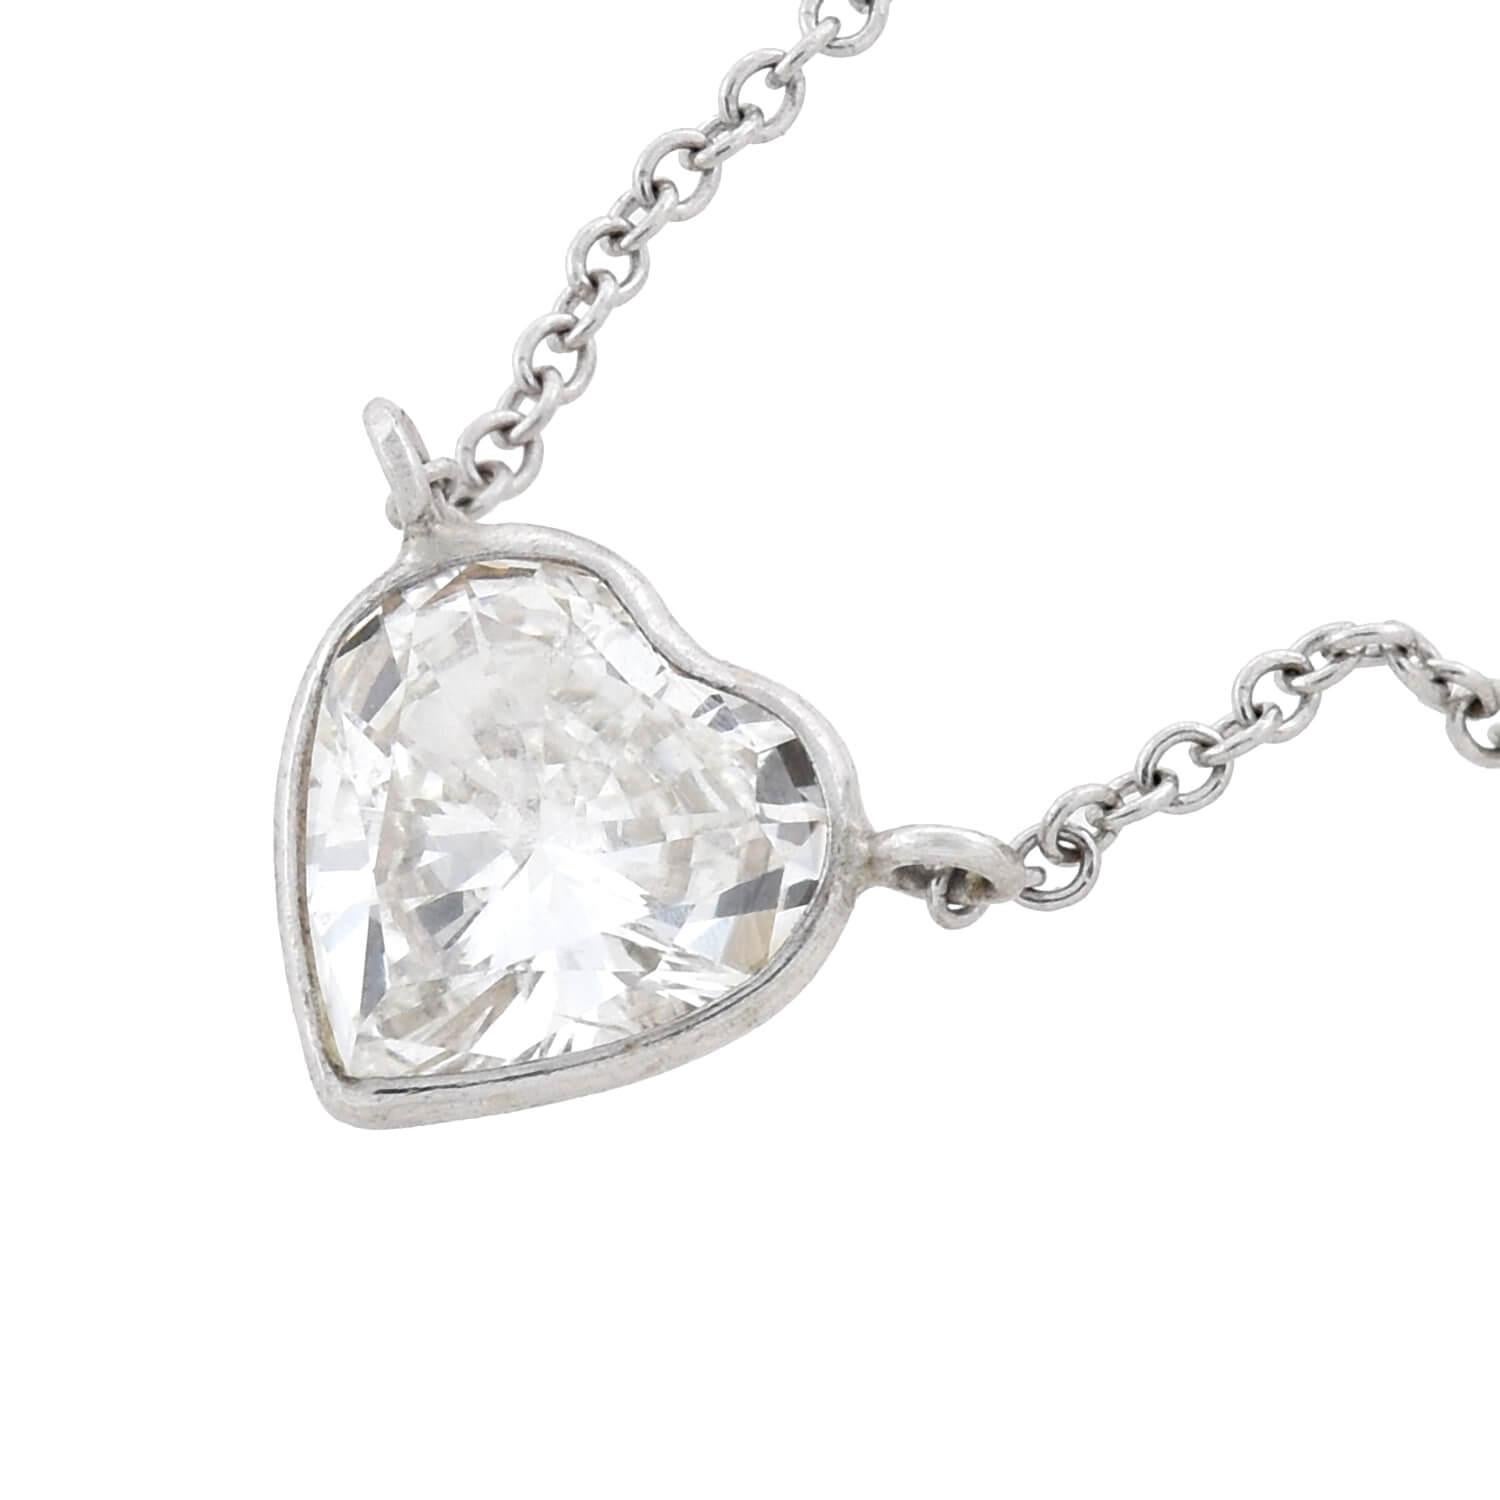 A beautiful and romantic Estate diamond necklace! Crafted in 14kt white gold, this lovely piece is comprised of a single heart-shaped diamond pendant that attaches to a delicate white gold chain. The heart-shaped diamond is bezel set and weighs